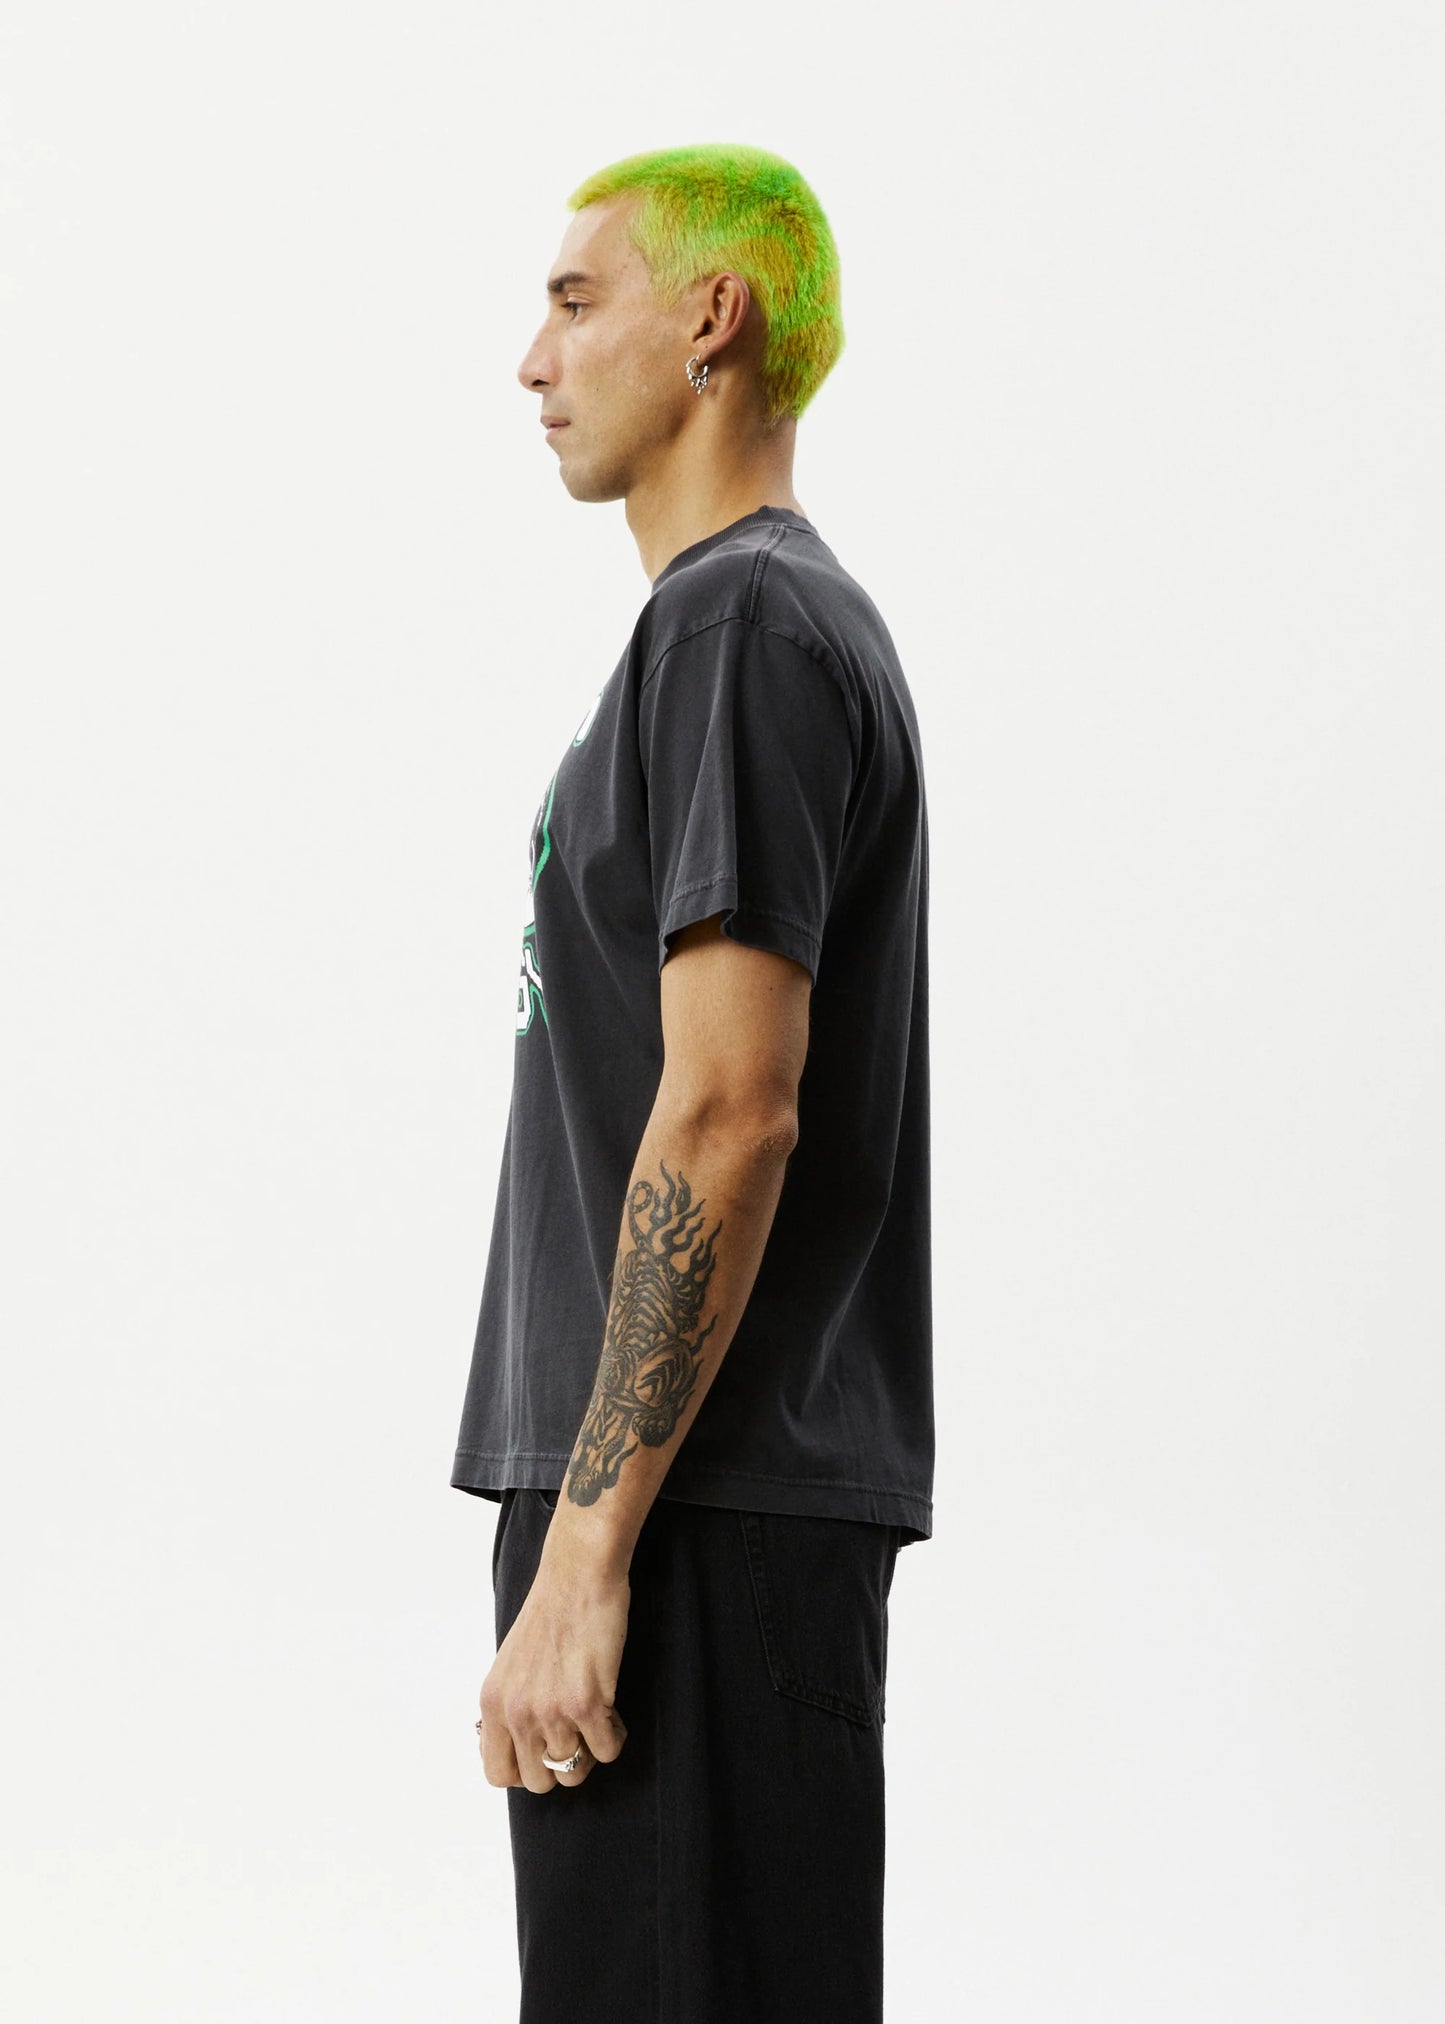 Earth Energy Recycled Boxy Fit Tee